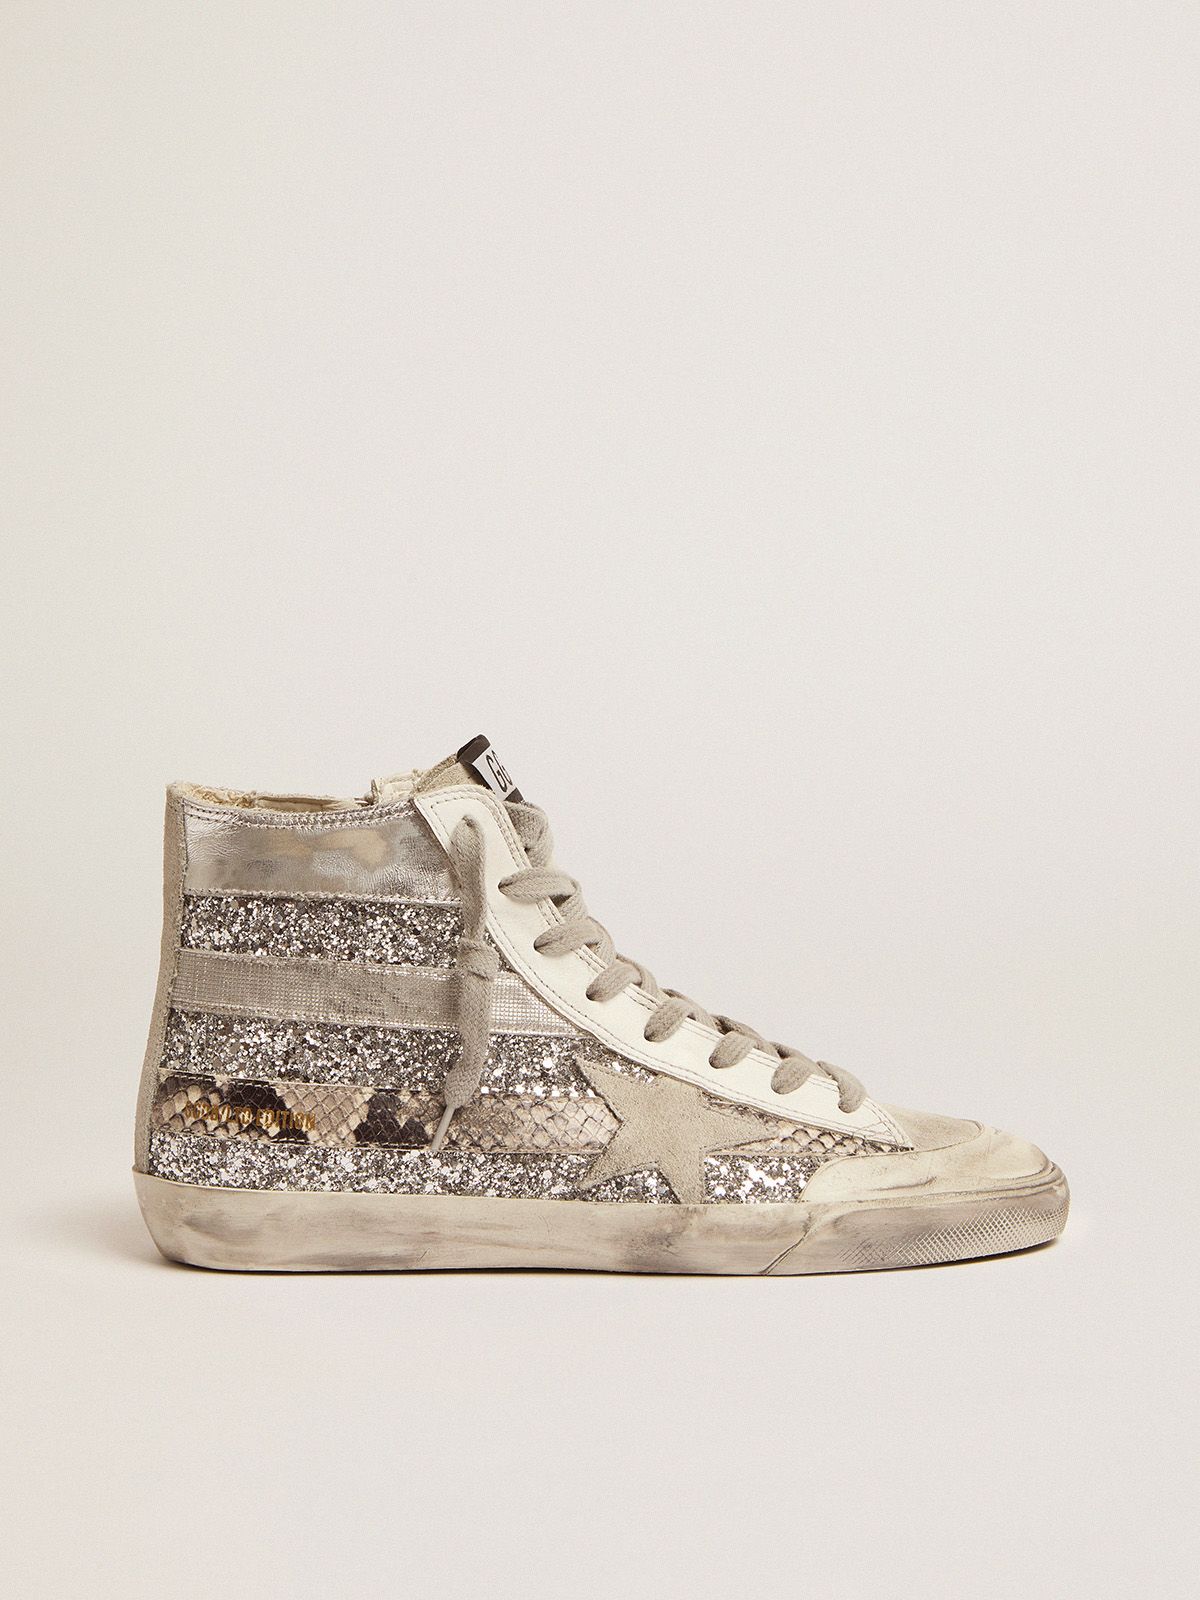 golden goose Francy with and upper Penstar stripes sneakers snake-print silver glitter LAB